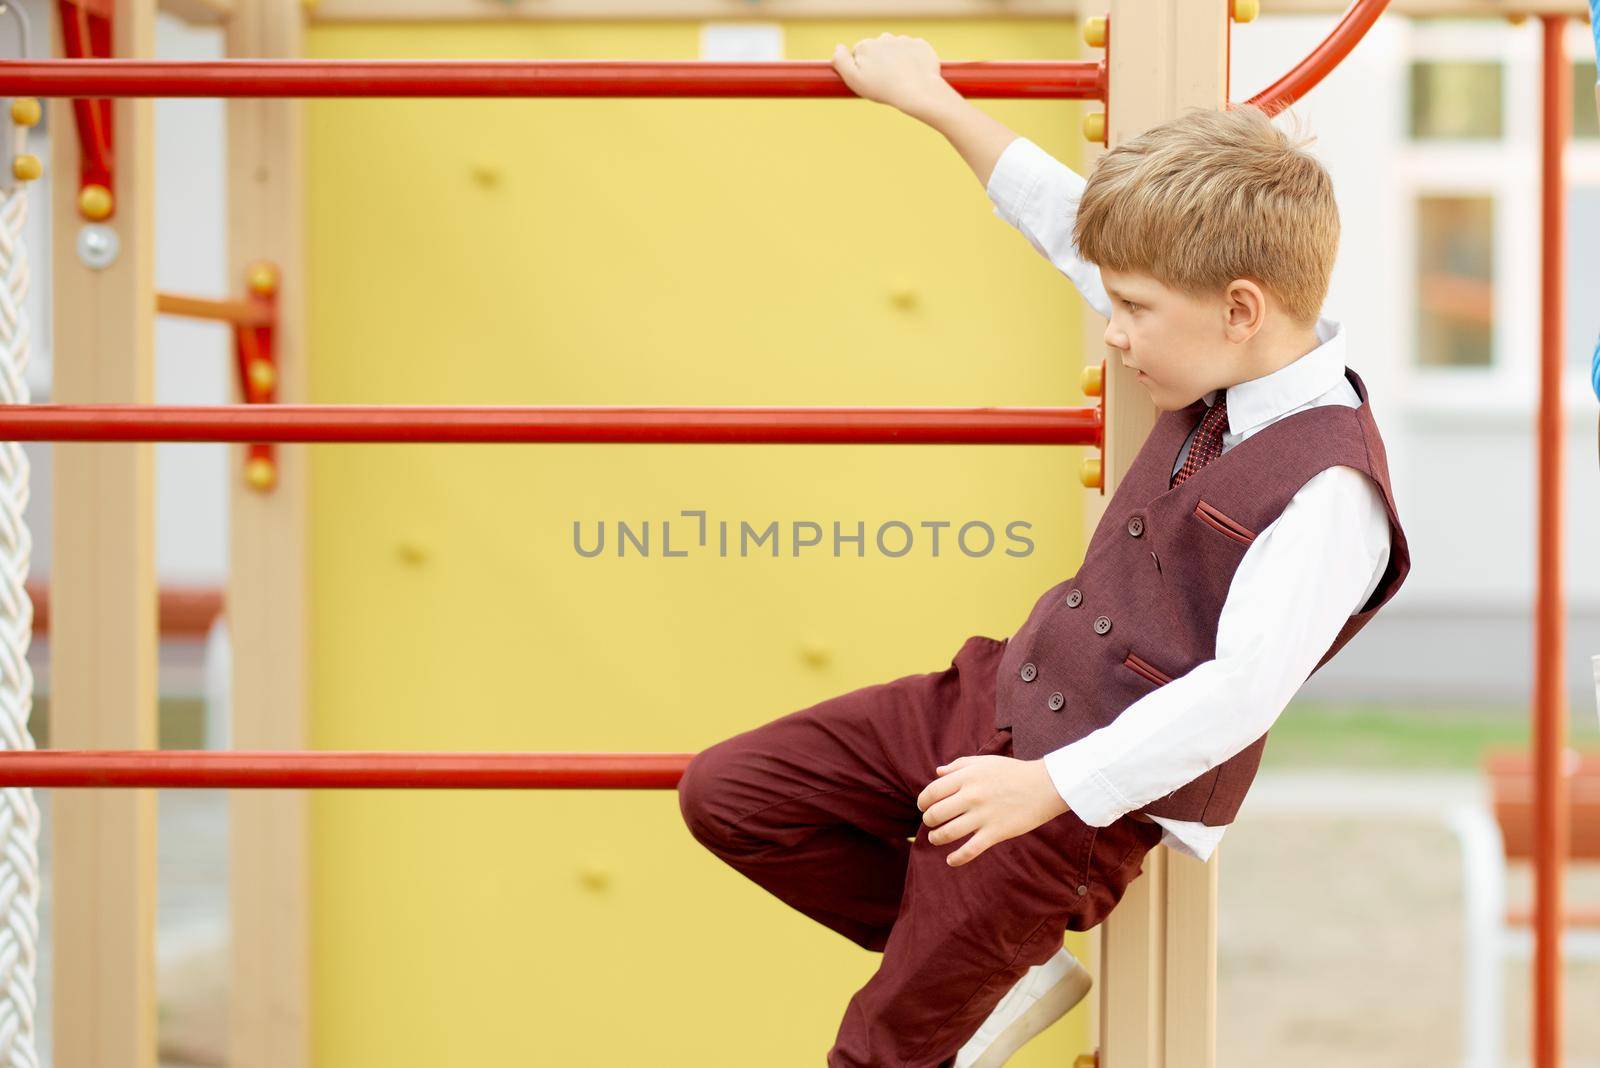 Boy in strict suit plays on the stairs at school on the first day by AntonIlchanka